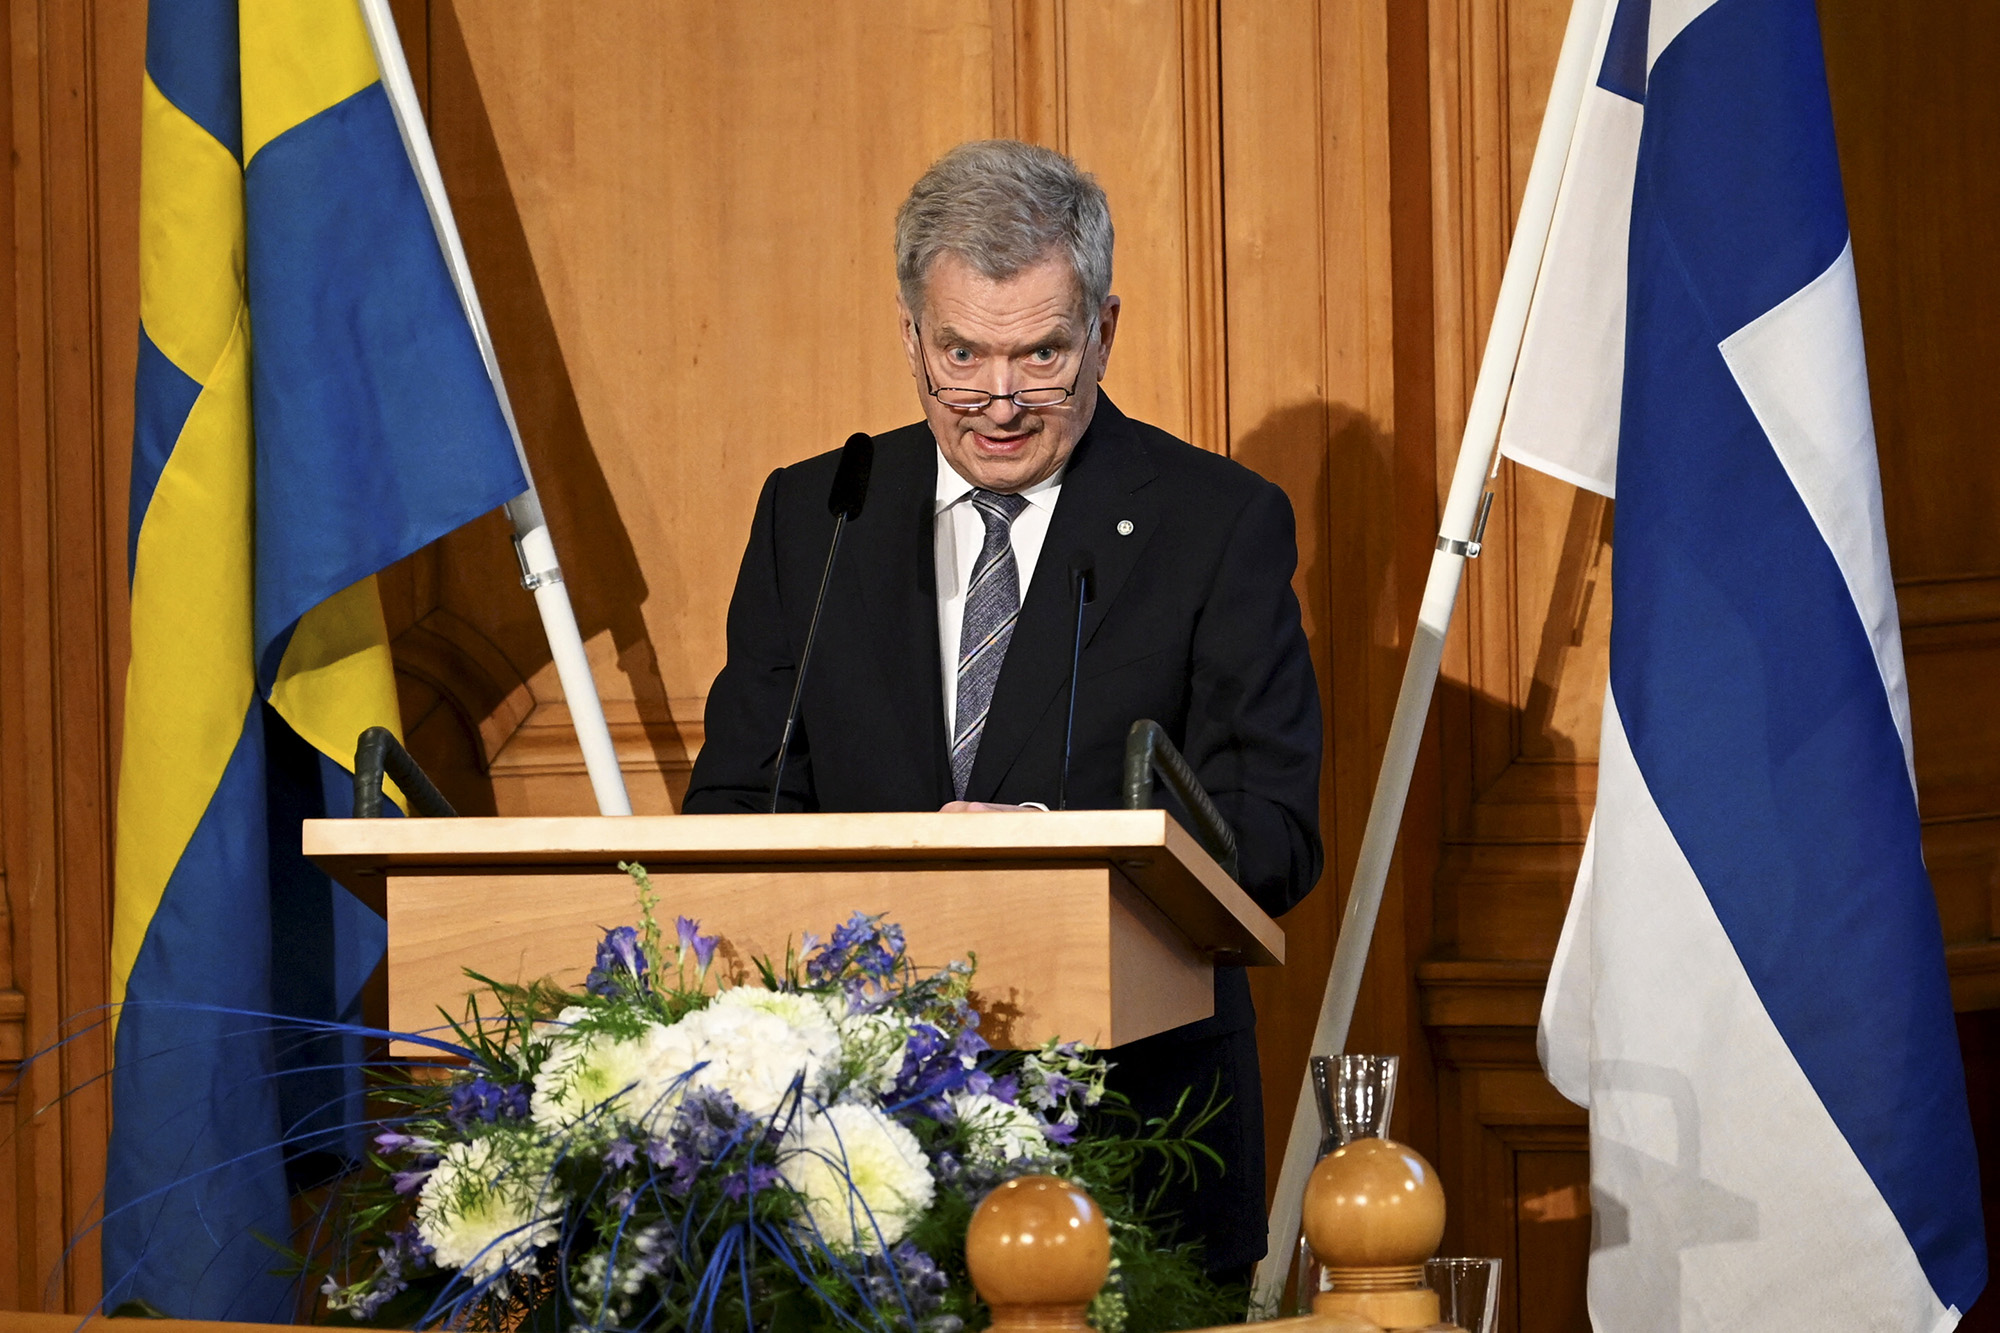 Finlands President Sauli Niinisto delivers a statement in the parliament building in Stockholm, Sweden, on May 17.